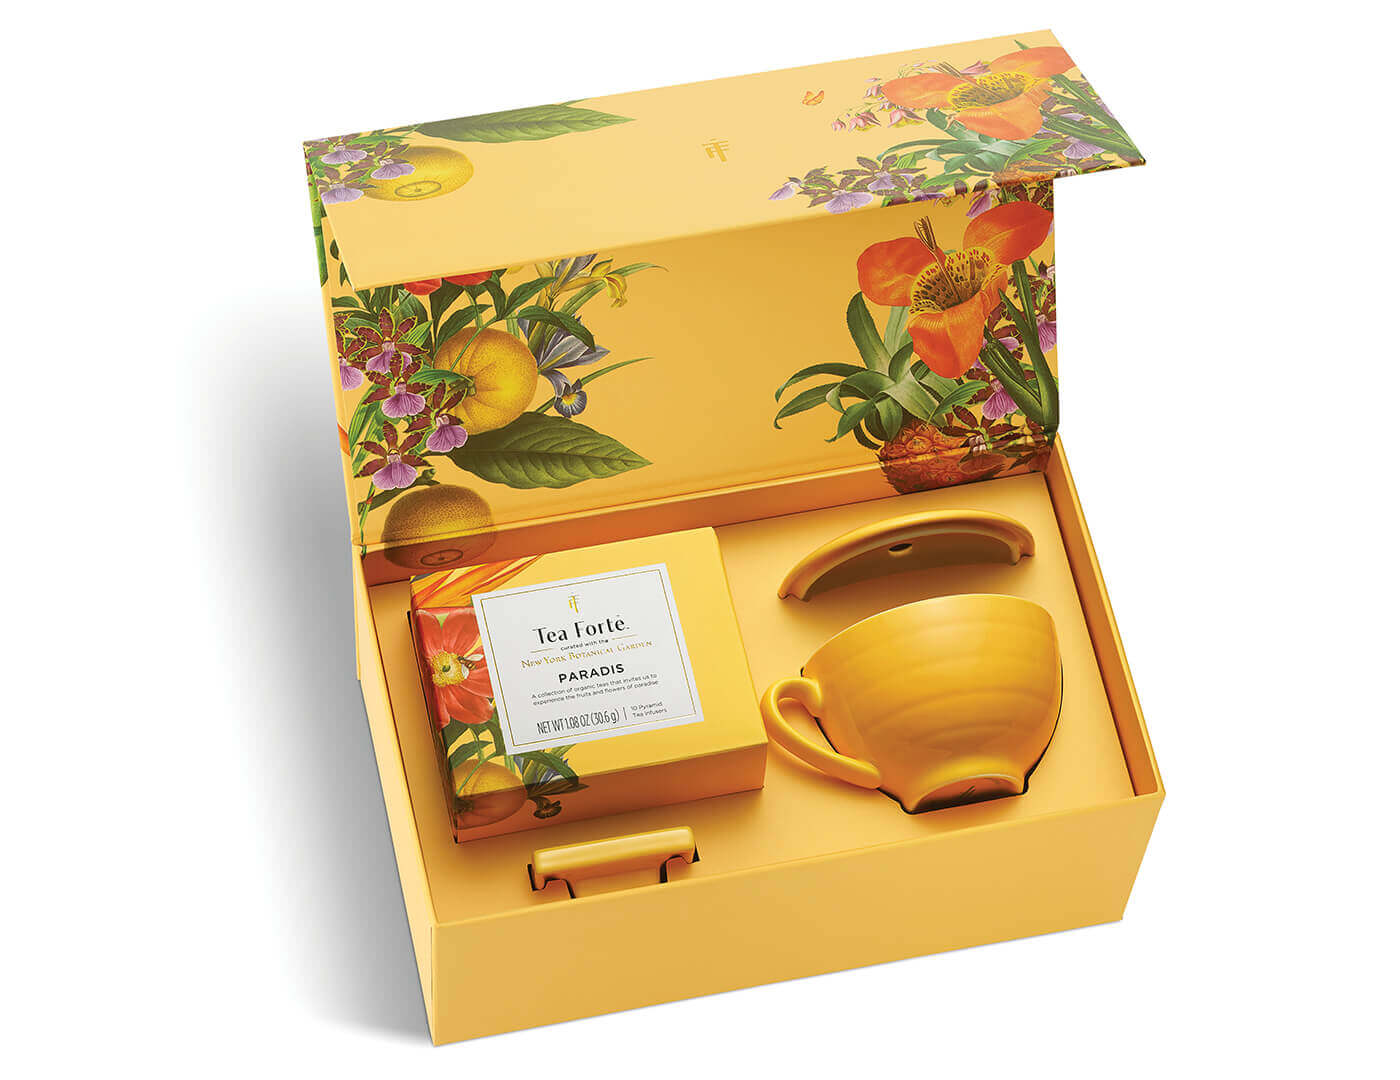 Paradis Gift Set with lid open showing contents of box